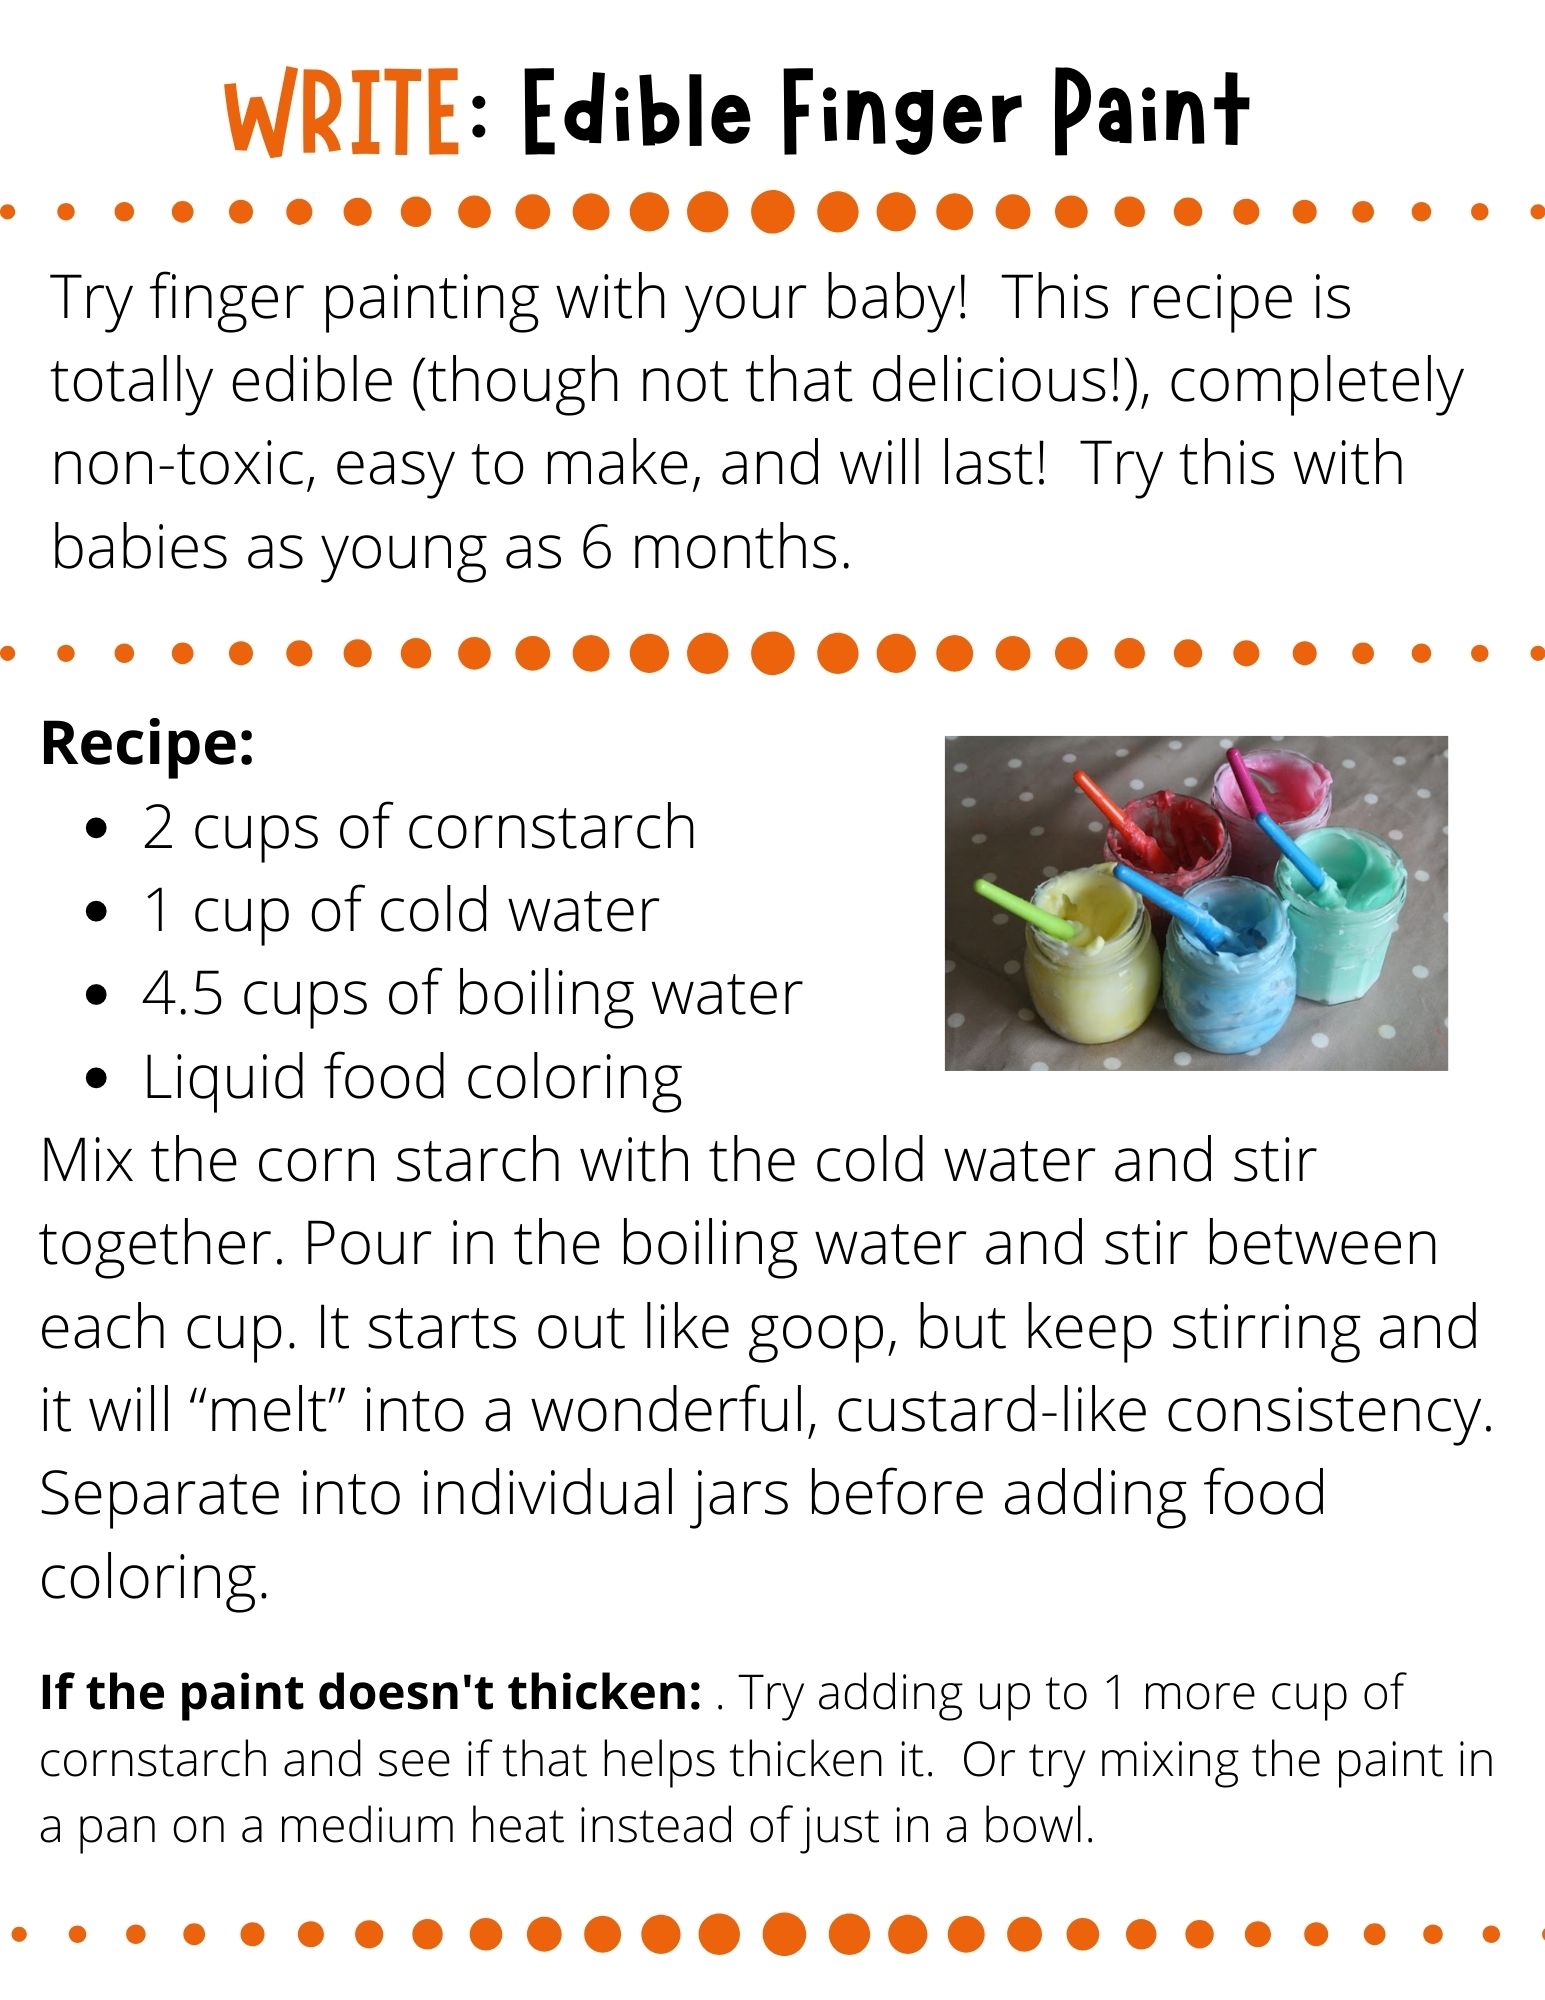 Try finger painting with your baby!  This recipe is totally edible (though not that delicious!), completely non-toxic, easy to make, and will last!  Try this with babies as young as 6 months.  Recipe:  2 cups of cornstarch  1 cup of cold water 4.5 cups of boiling water Liquid food coloring Mix the corn starch with the cold water and stir together. Pour in the boiling water and stir between each cup. It starts out like goop, but keep stirring and it will “melt” into a wonderful, custard-like consistency. Separate into individual jars before adding food coloring.  If the paint doesn't thicken: . Try adding up to 1 more cup of cornstarch and see if that helps thicken it.  Or try mixing the paint in a pan on a medium heat instead of just in a bowl.